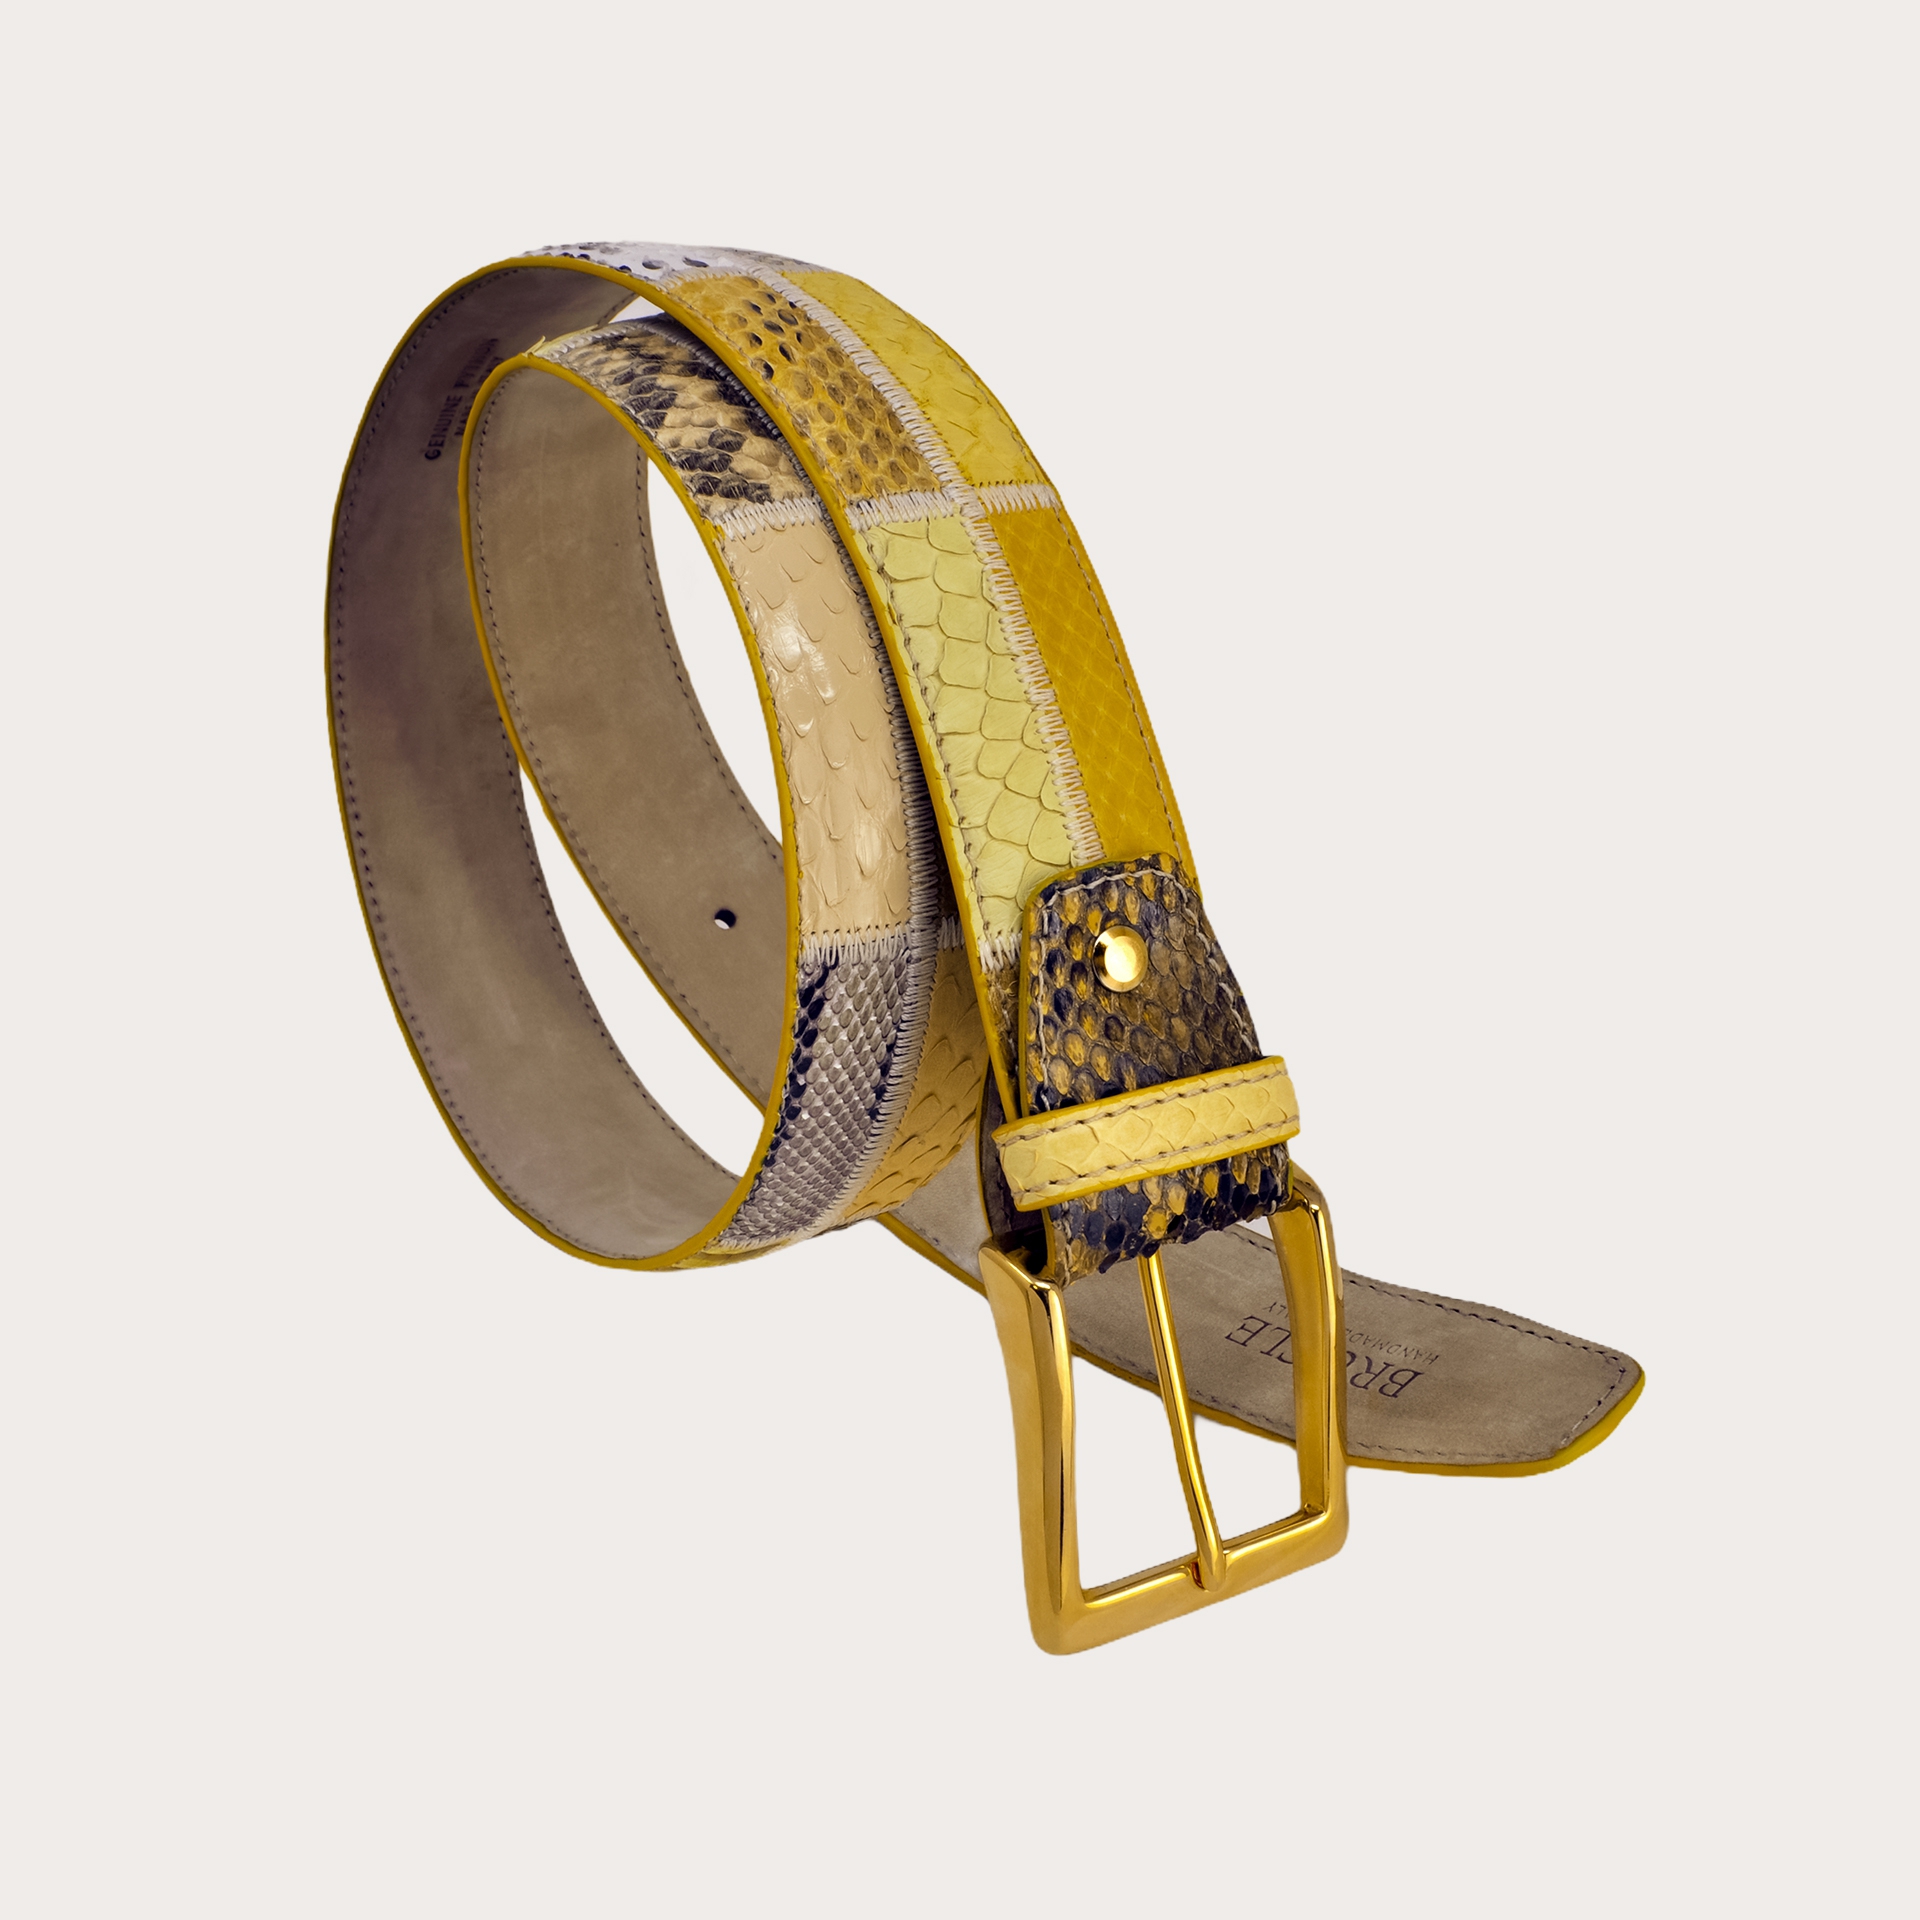 Brucle yellow python belt h40 made in italy gold buckle